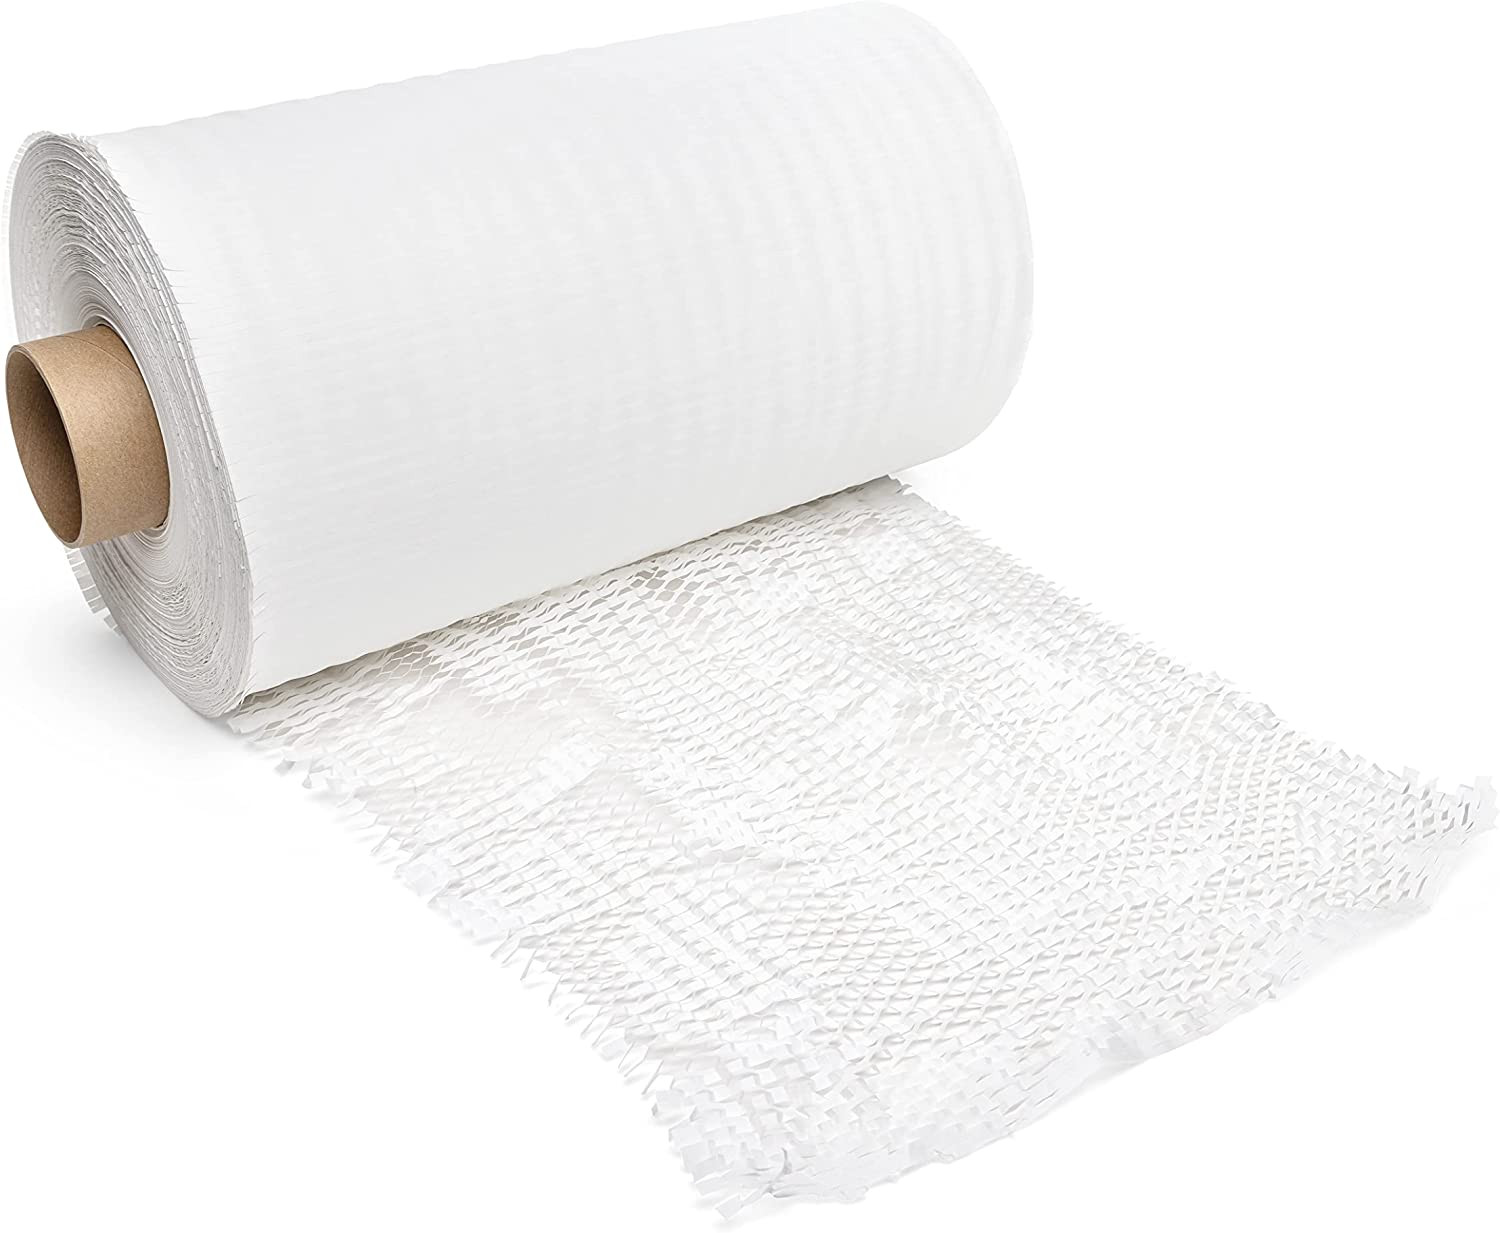 15 x 300' HexcelWrap Refill Roll for MP-300W Honeycomb Packing Paper  Station, White buy in stock in U.S. in IDL Packaging